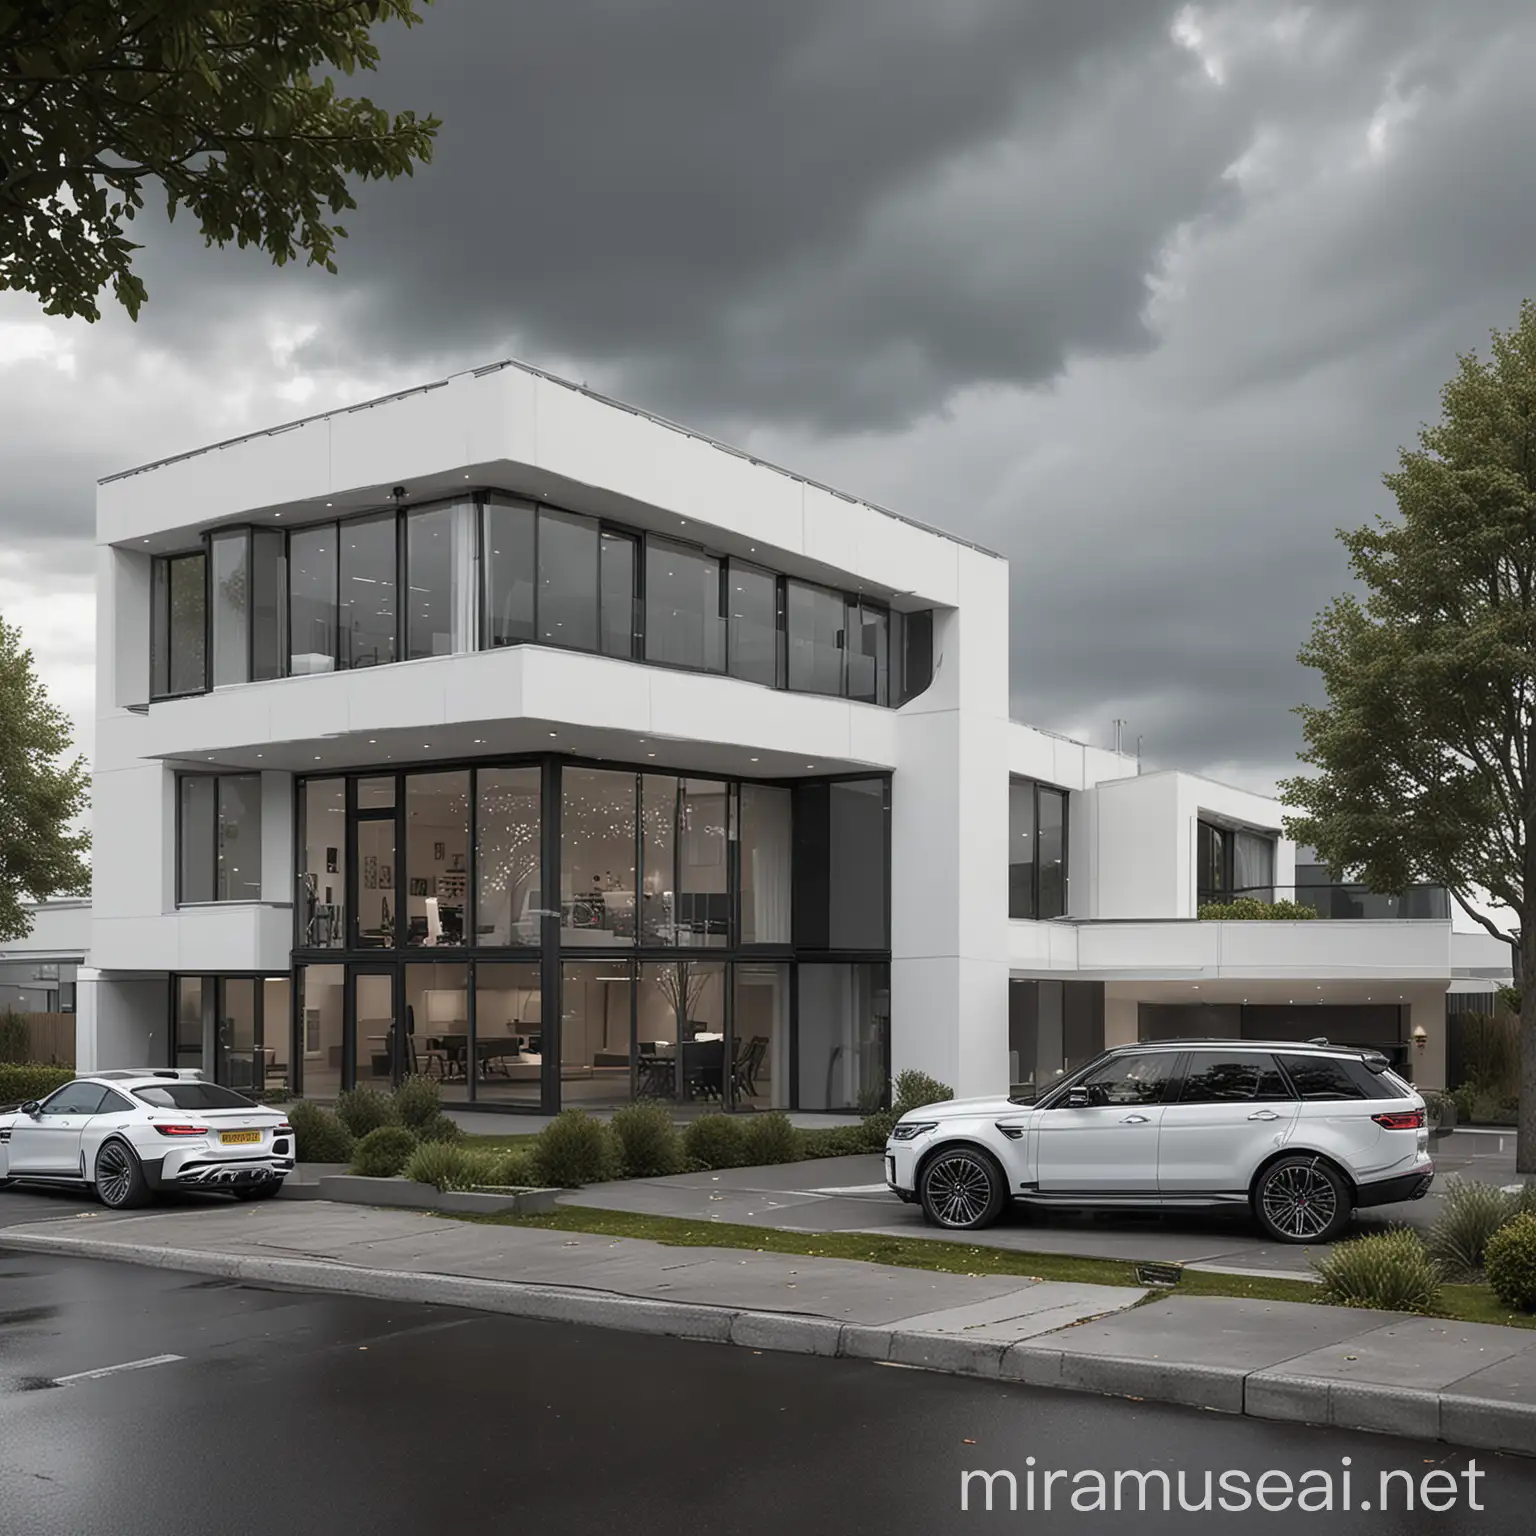 A realistic wide-angle image of a contemporary exterior design of a modular house with display windows, a terrace, a large yard, a parking garage for 2 cars, a Range Rover and a BMW M4, with white and grey colour scheme, a use of laser cut panels, decorative Lighting, with an overcast cloud and trees in a residential environment.